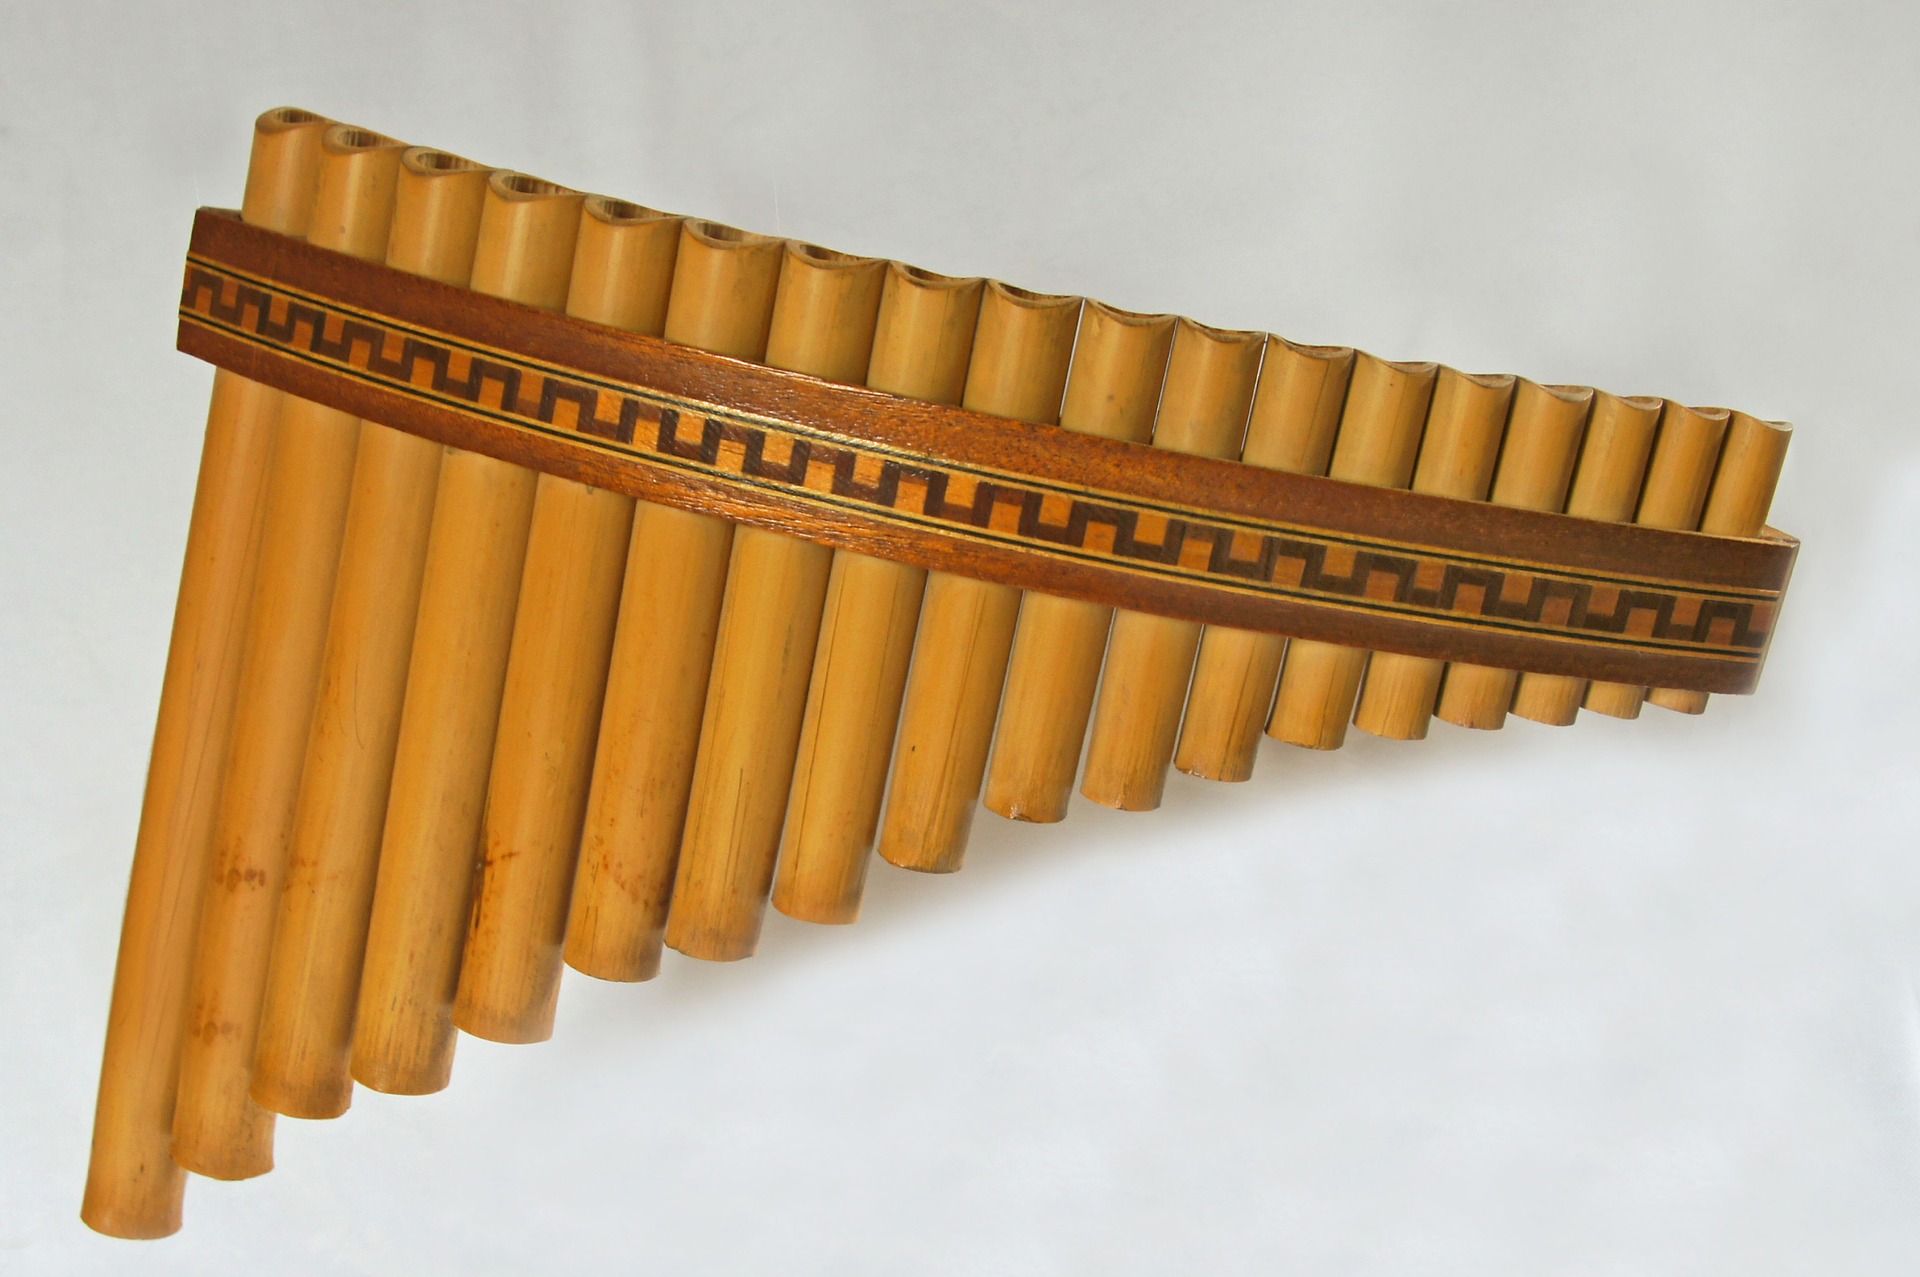 free pixabay image of a pan flute